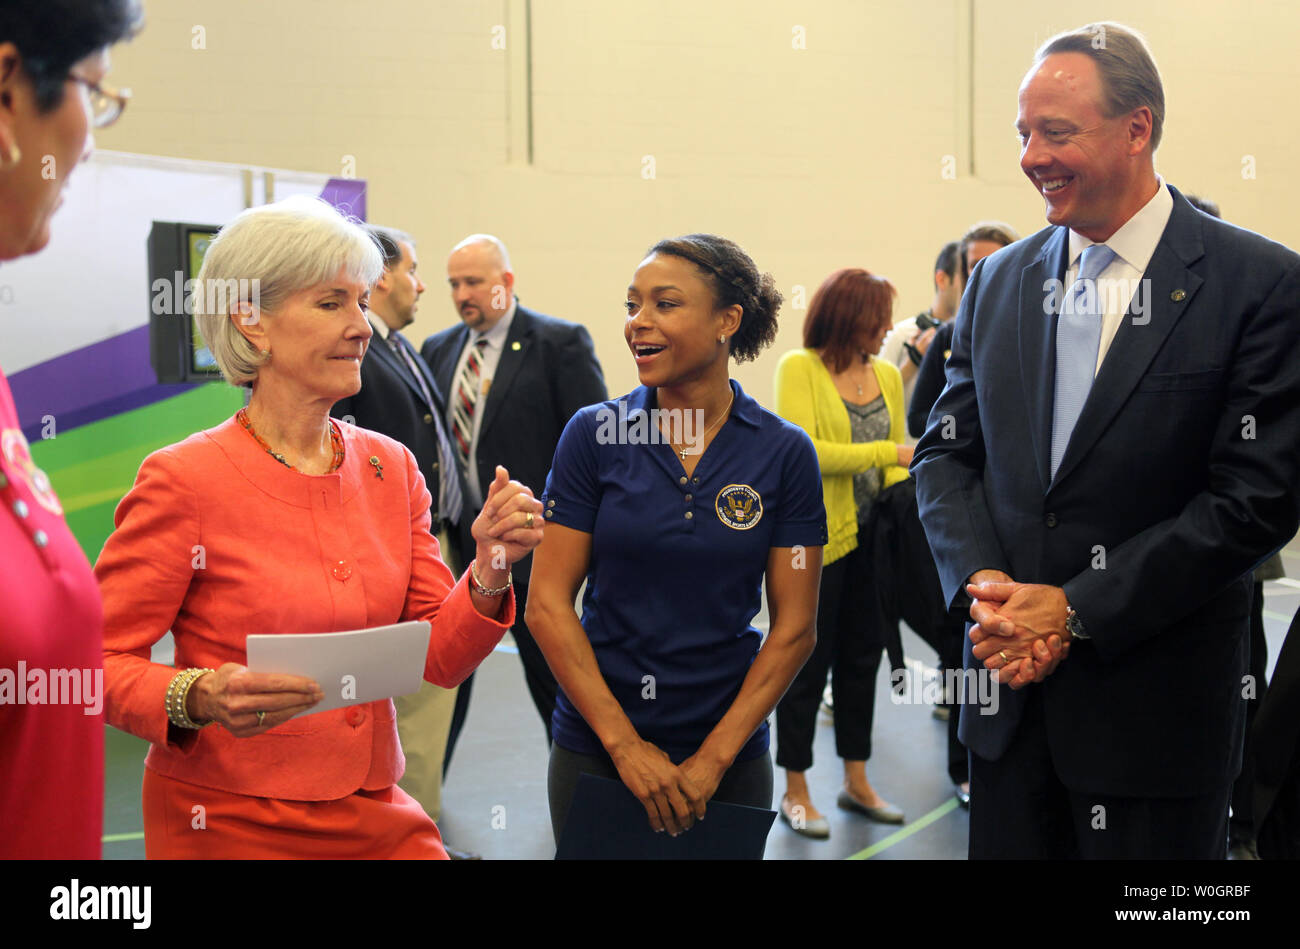 Health and Human Services Secretary Kathleen Sebelius talks with Olympic gymnast Dominique Dawes (C) and Michael Gallagher, ESA CEO, during the President's Council on Fitness, Sports and Nutrition active video game demonstration event with students from Walker Jones Education Campus in Washington DC on April 30, 2012.    UPI/Molly Riley Stock Photo